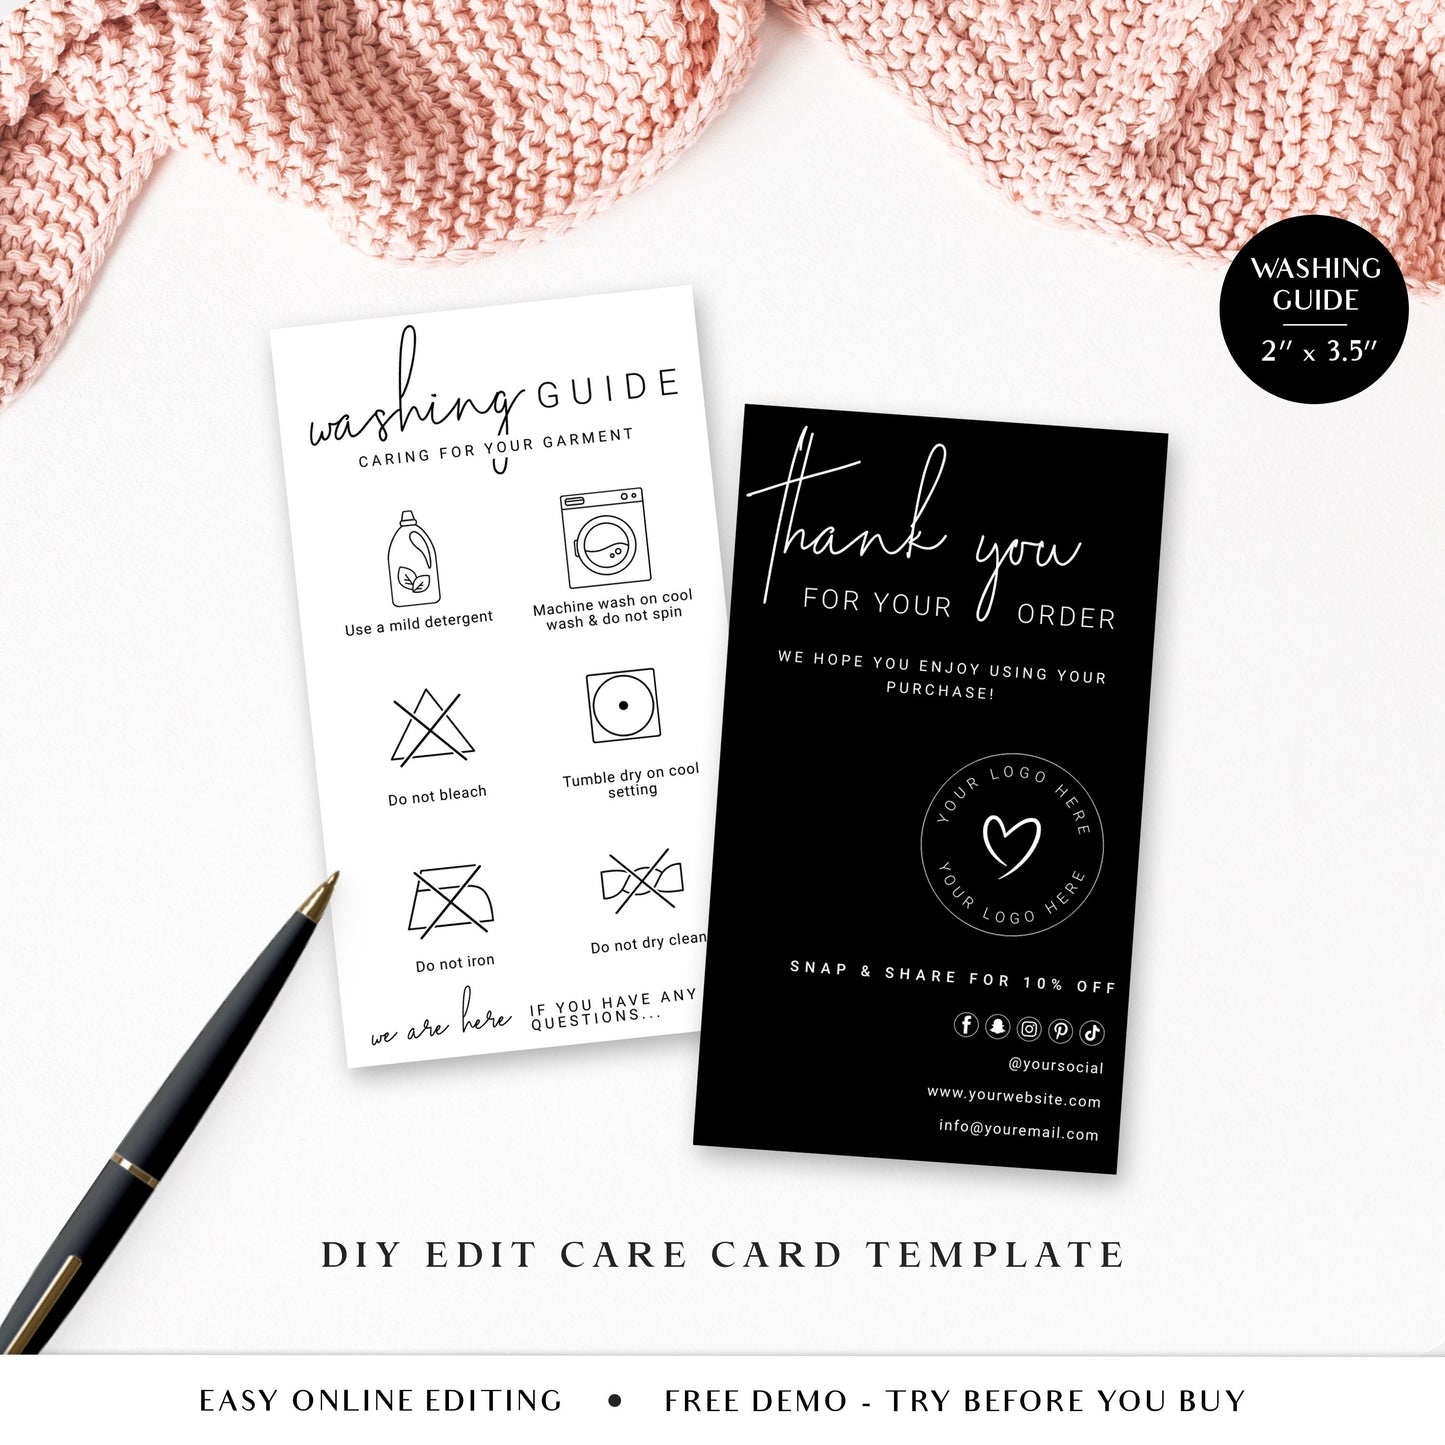 Printable Tumbler Care Cards - Small Business Print and Cut